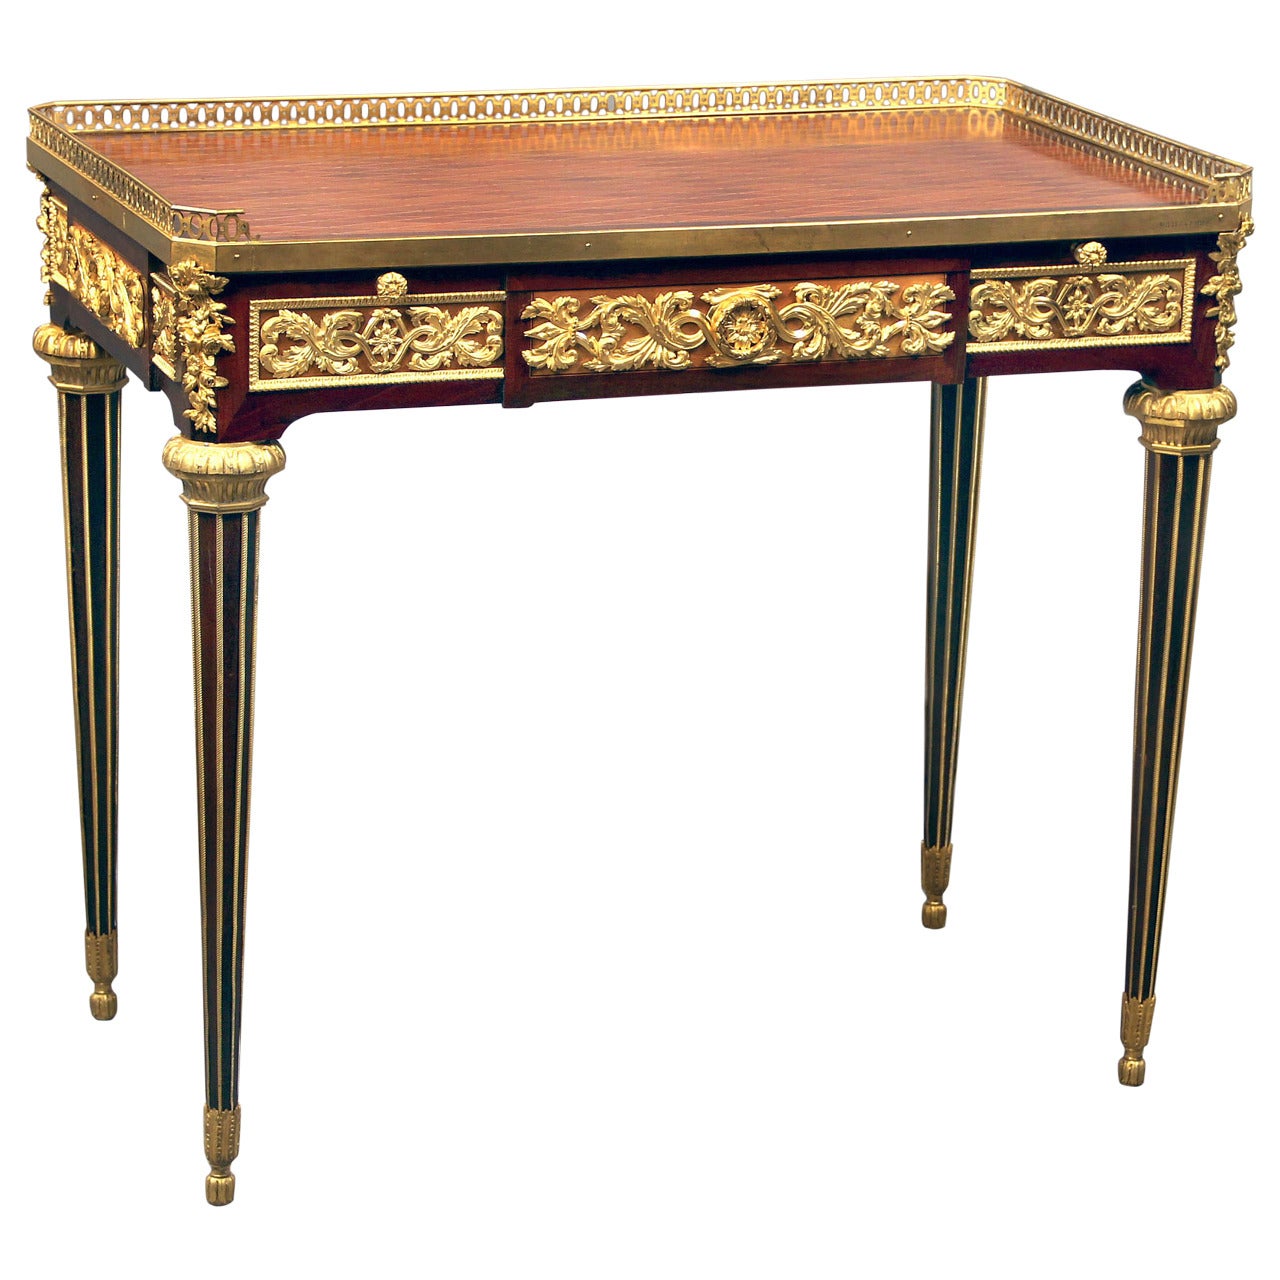 Fine Late 19th Century Gilt Bronze-Mounted Writing Table by Maison Millet